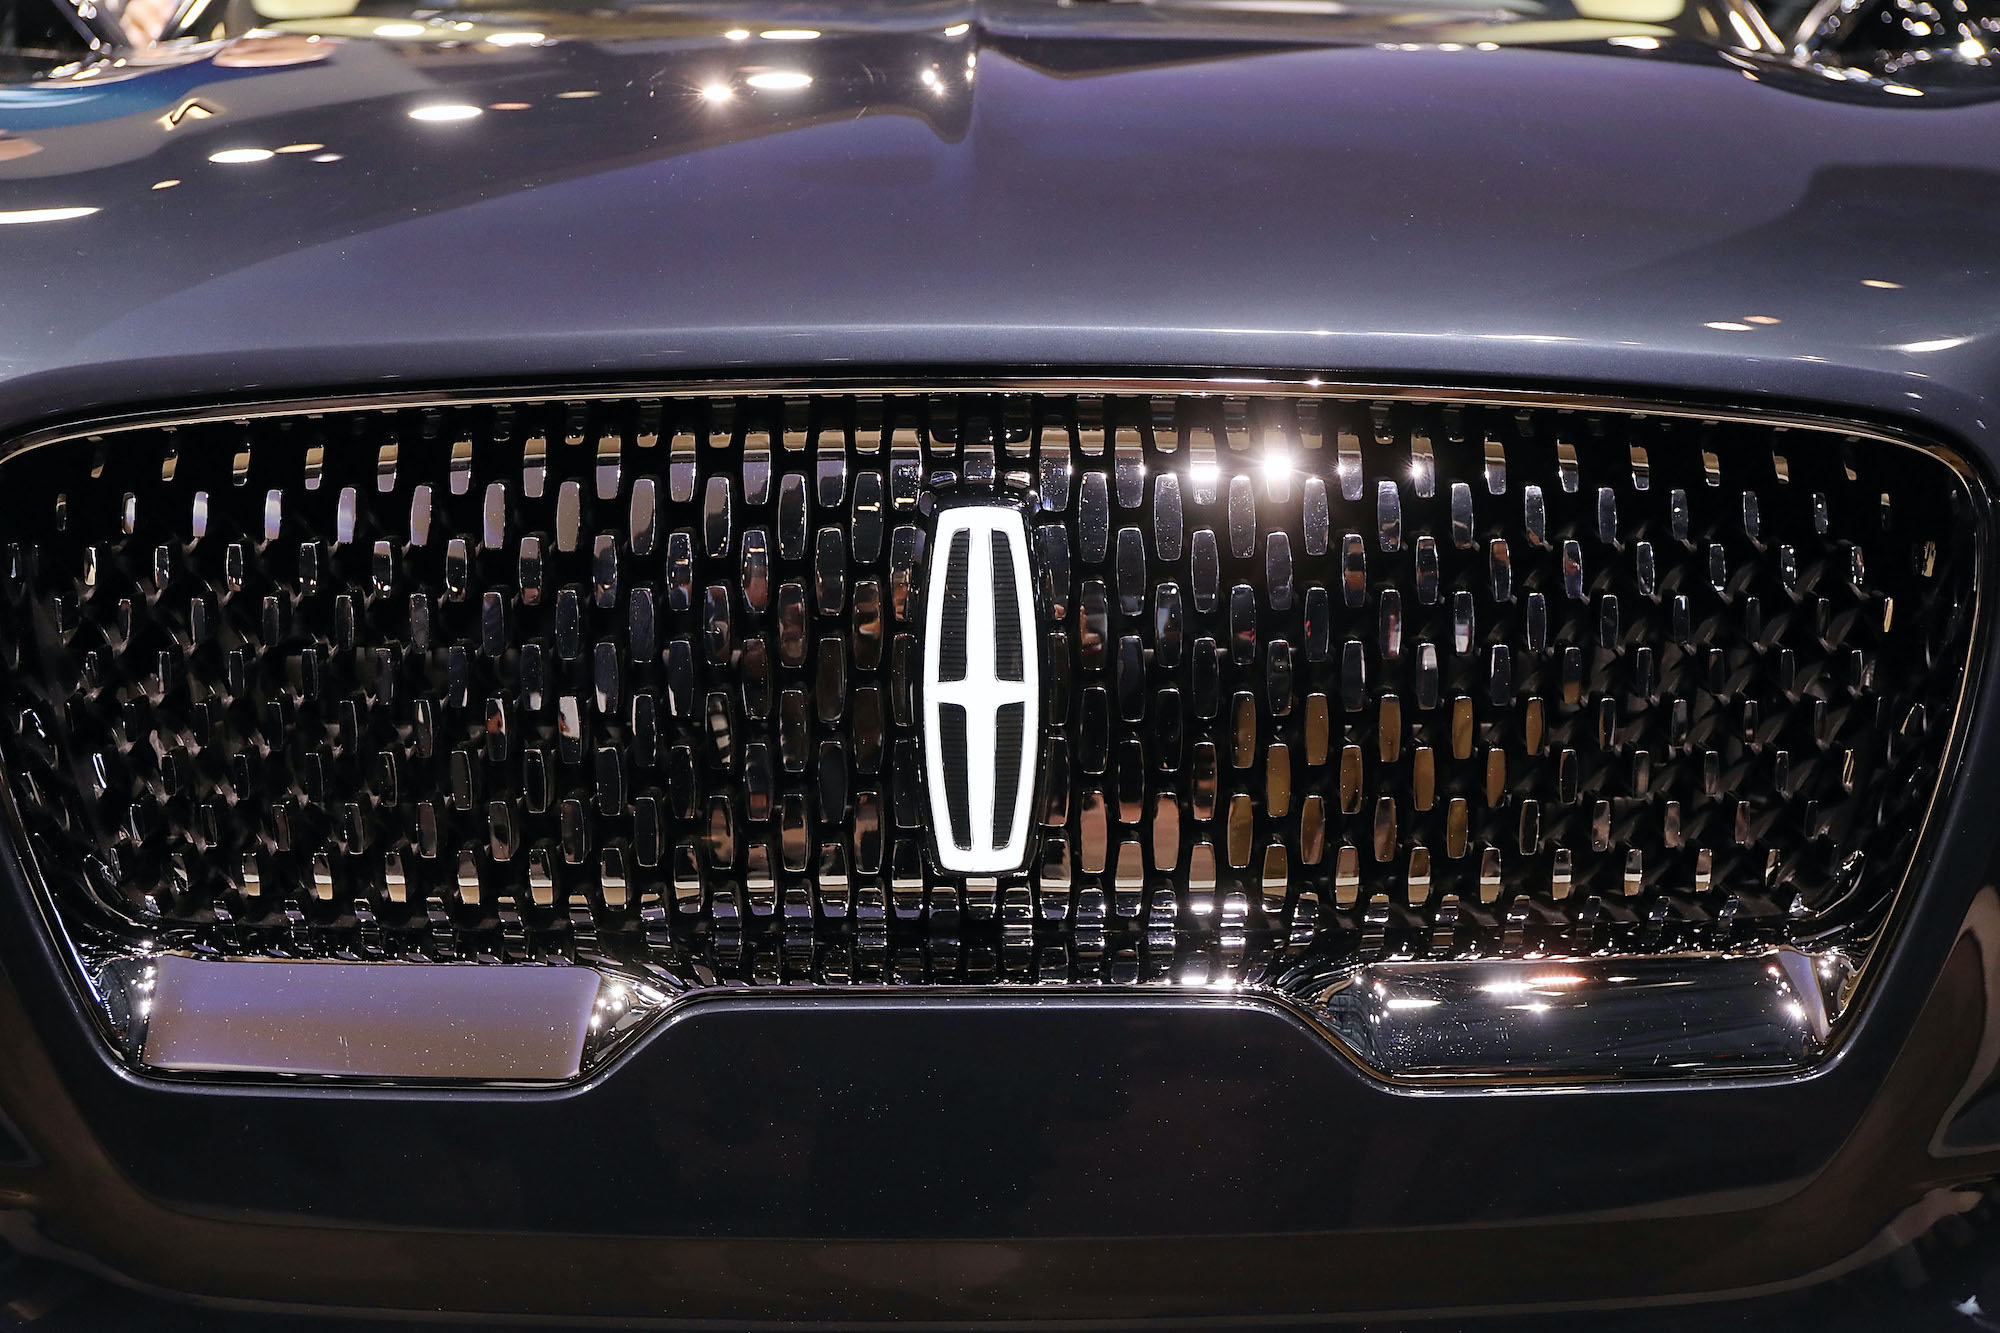 The front grill of the new 2019 Lincoln Aviator SUV, Lincoln's first plug-in hybrid vehicle, is displayed at the New York International Auto Show